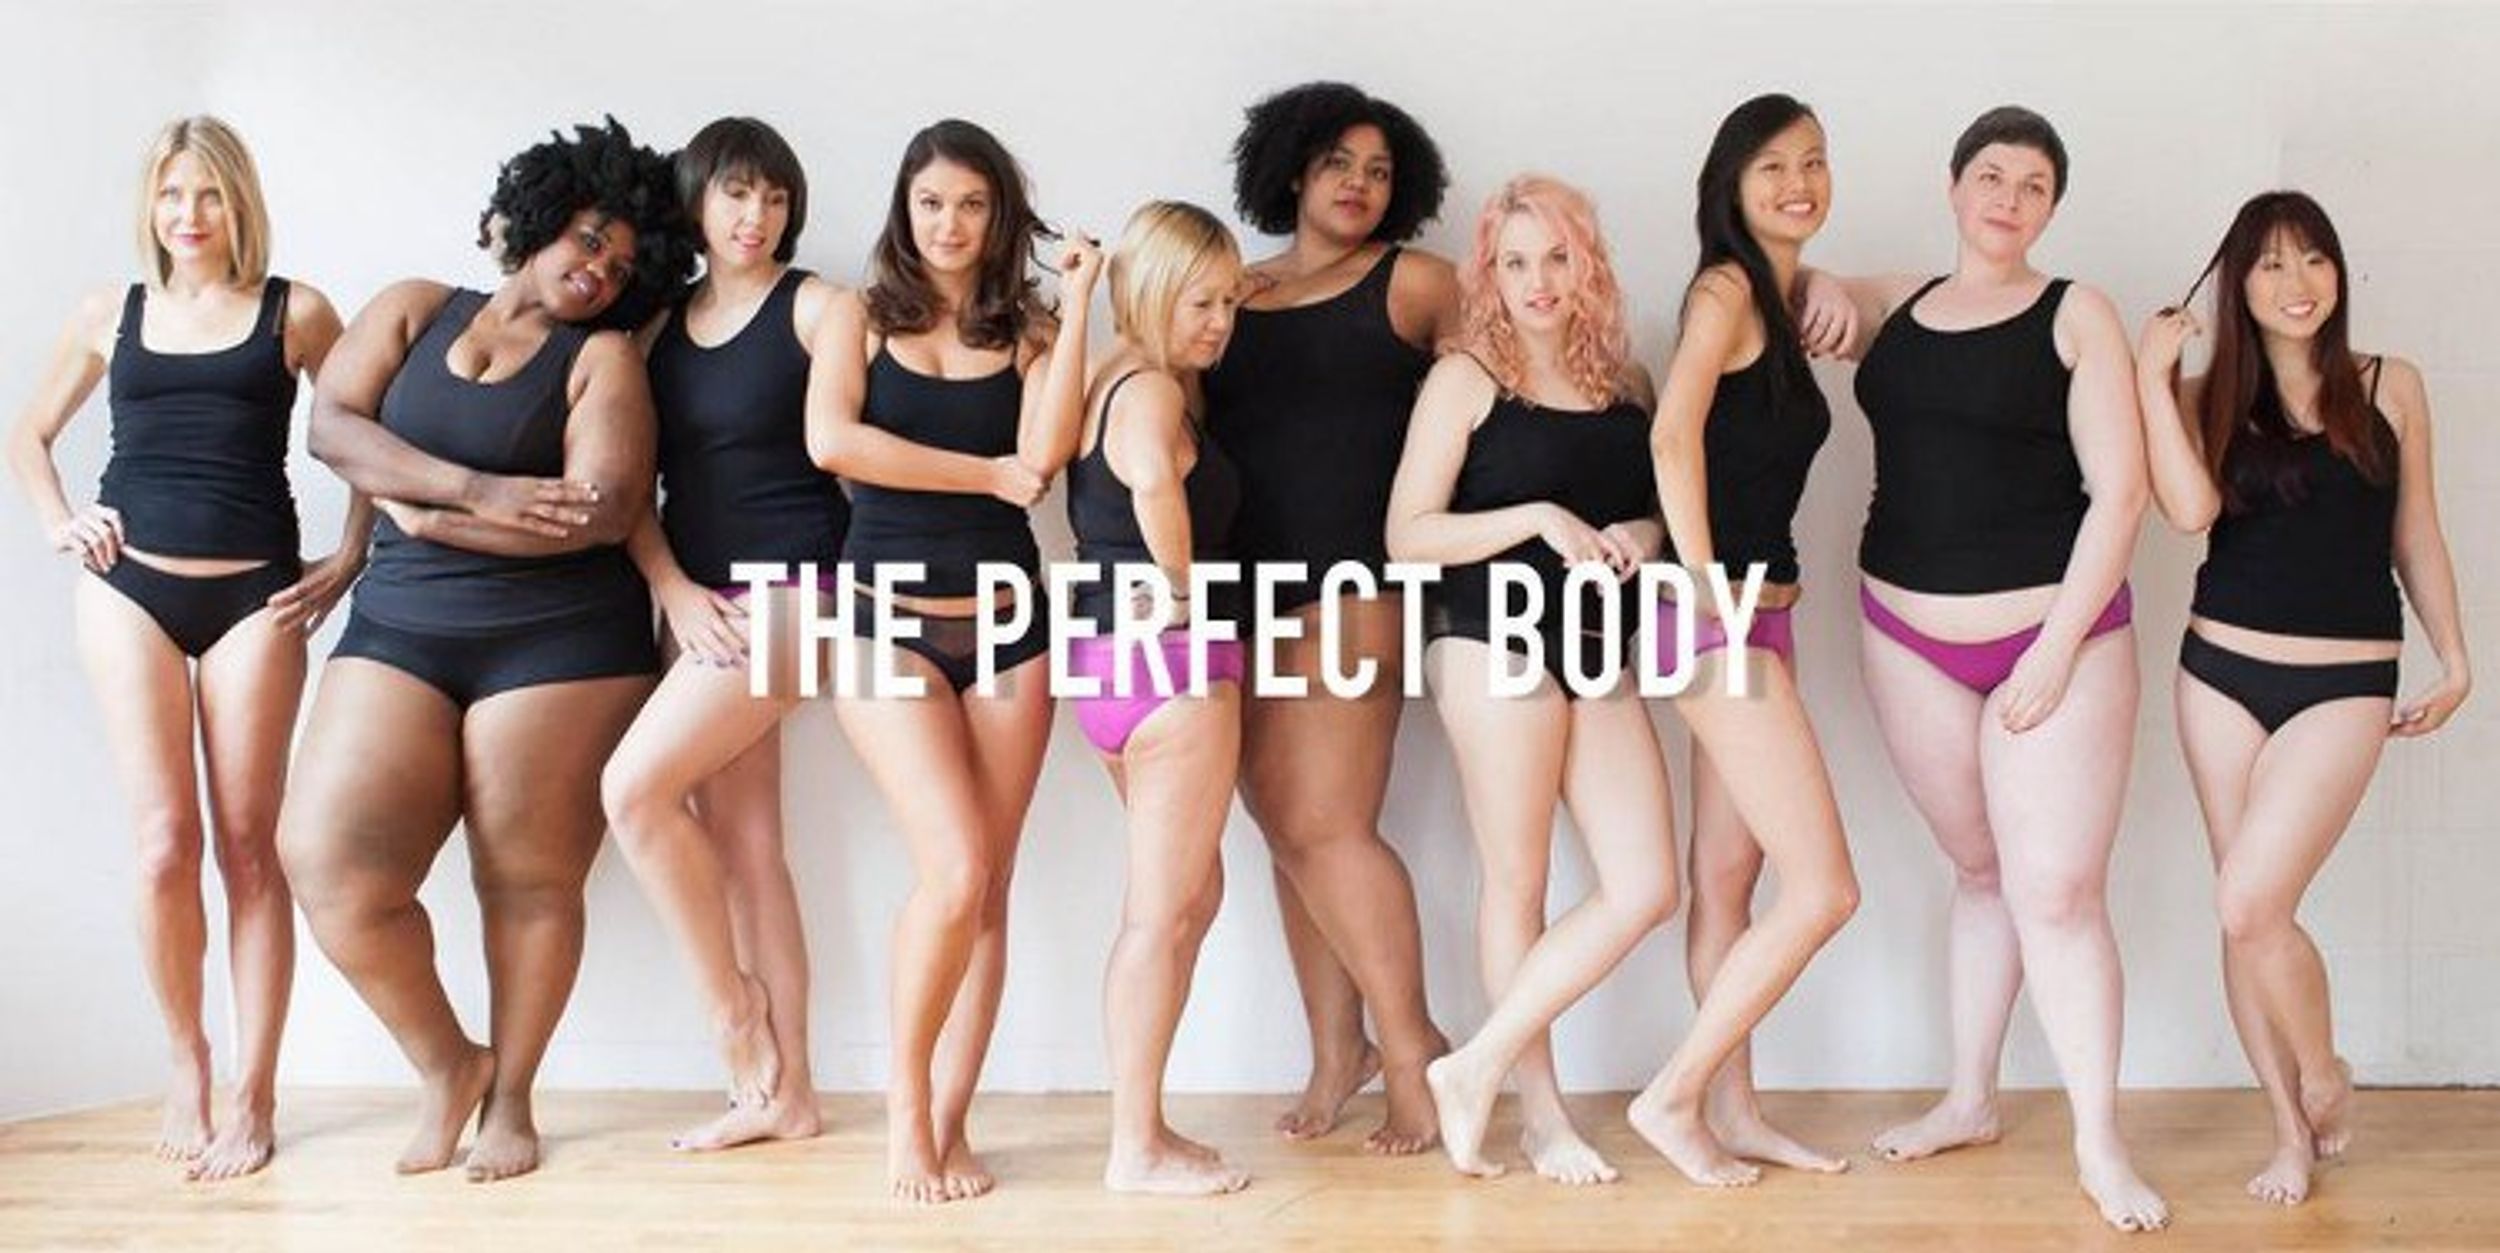 Body Positivity In The Fashion Industry